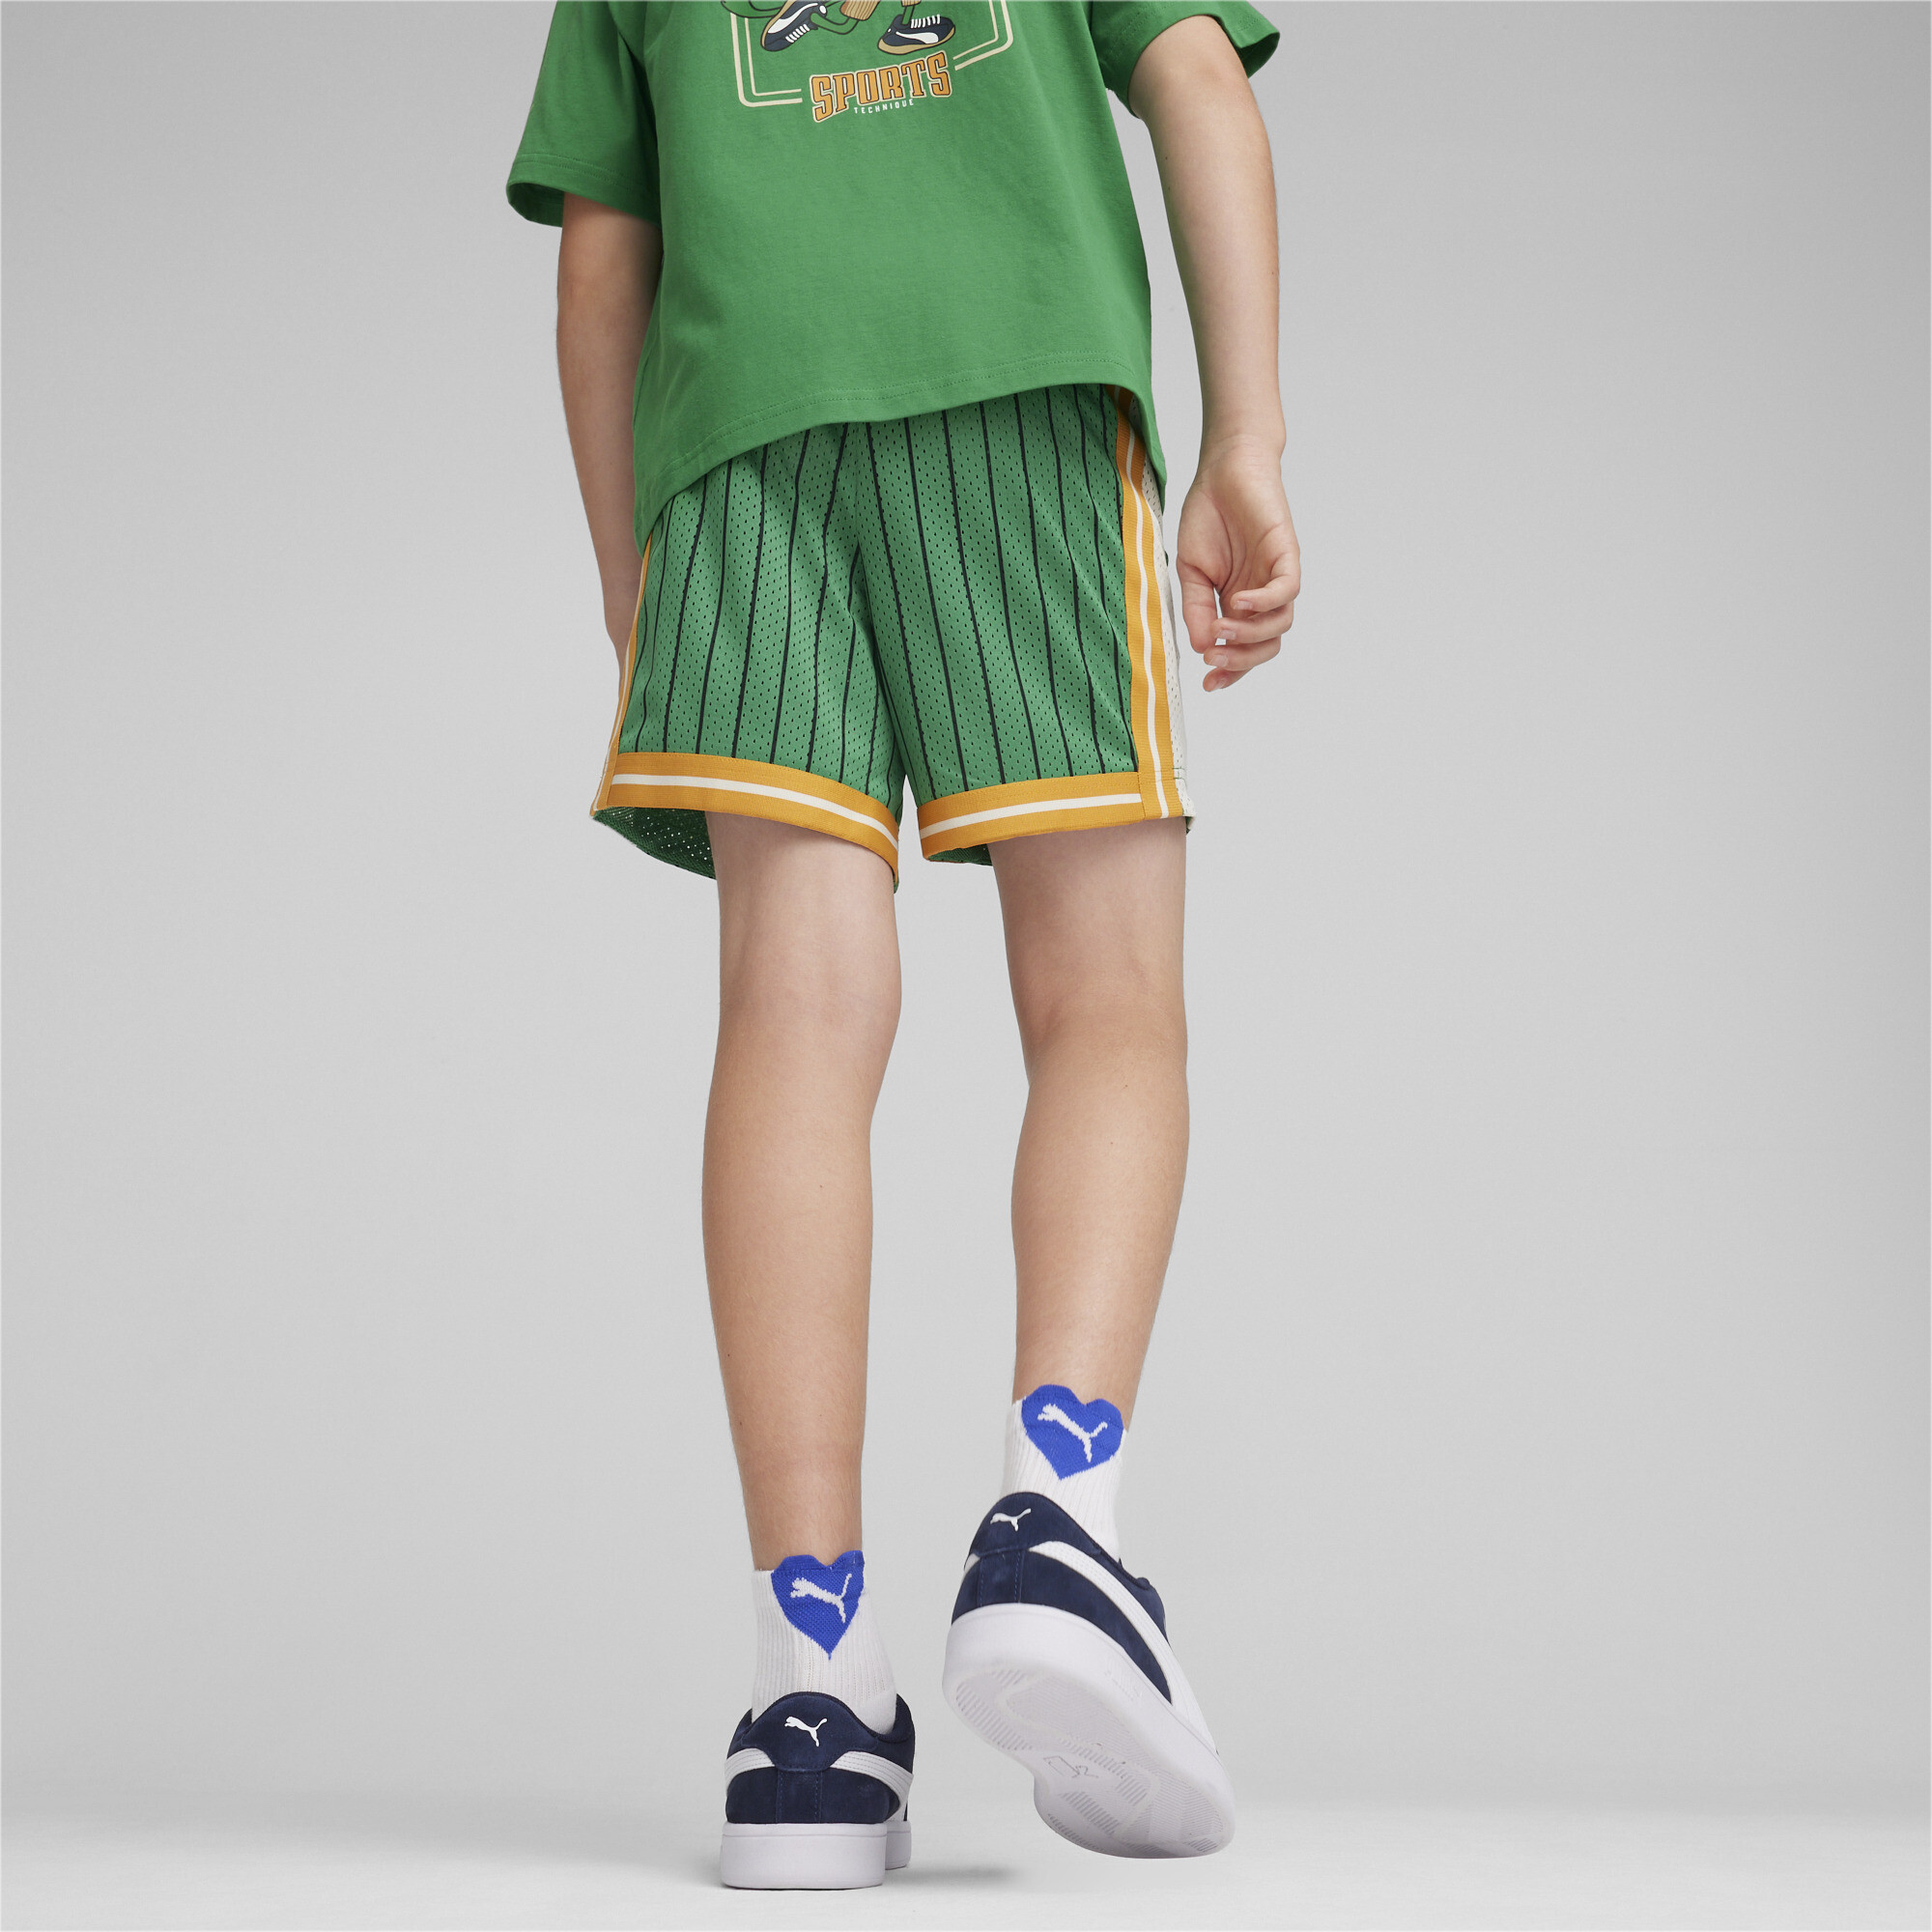 PUMA For The Fanbase Basketball Shorts In Green, Size 13-14 Youth